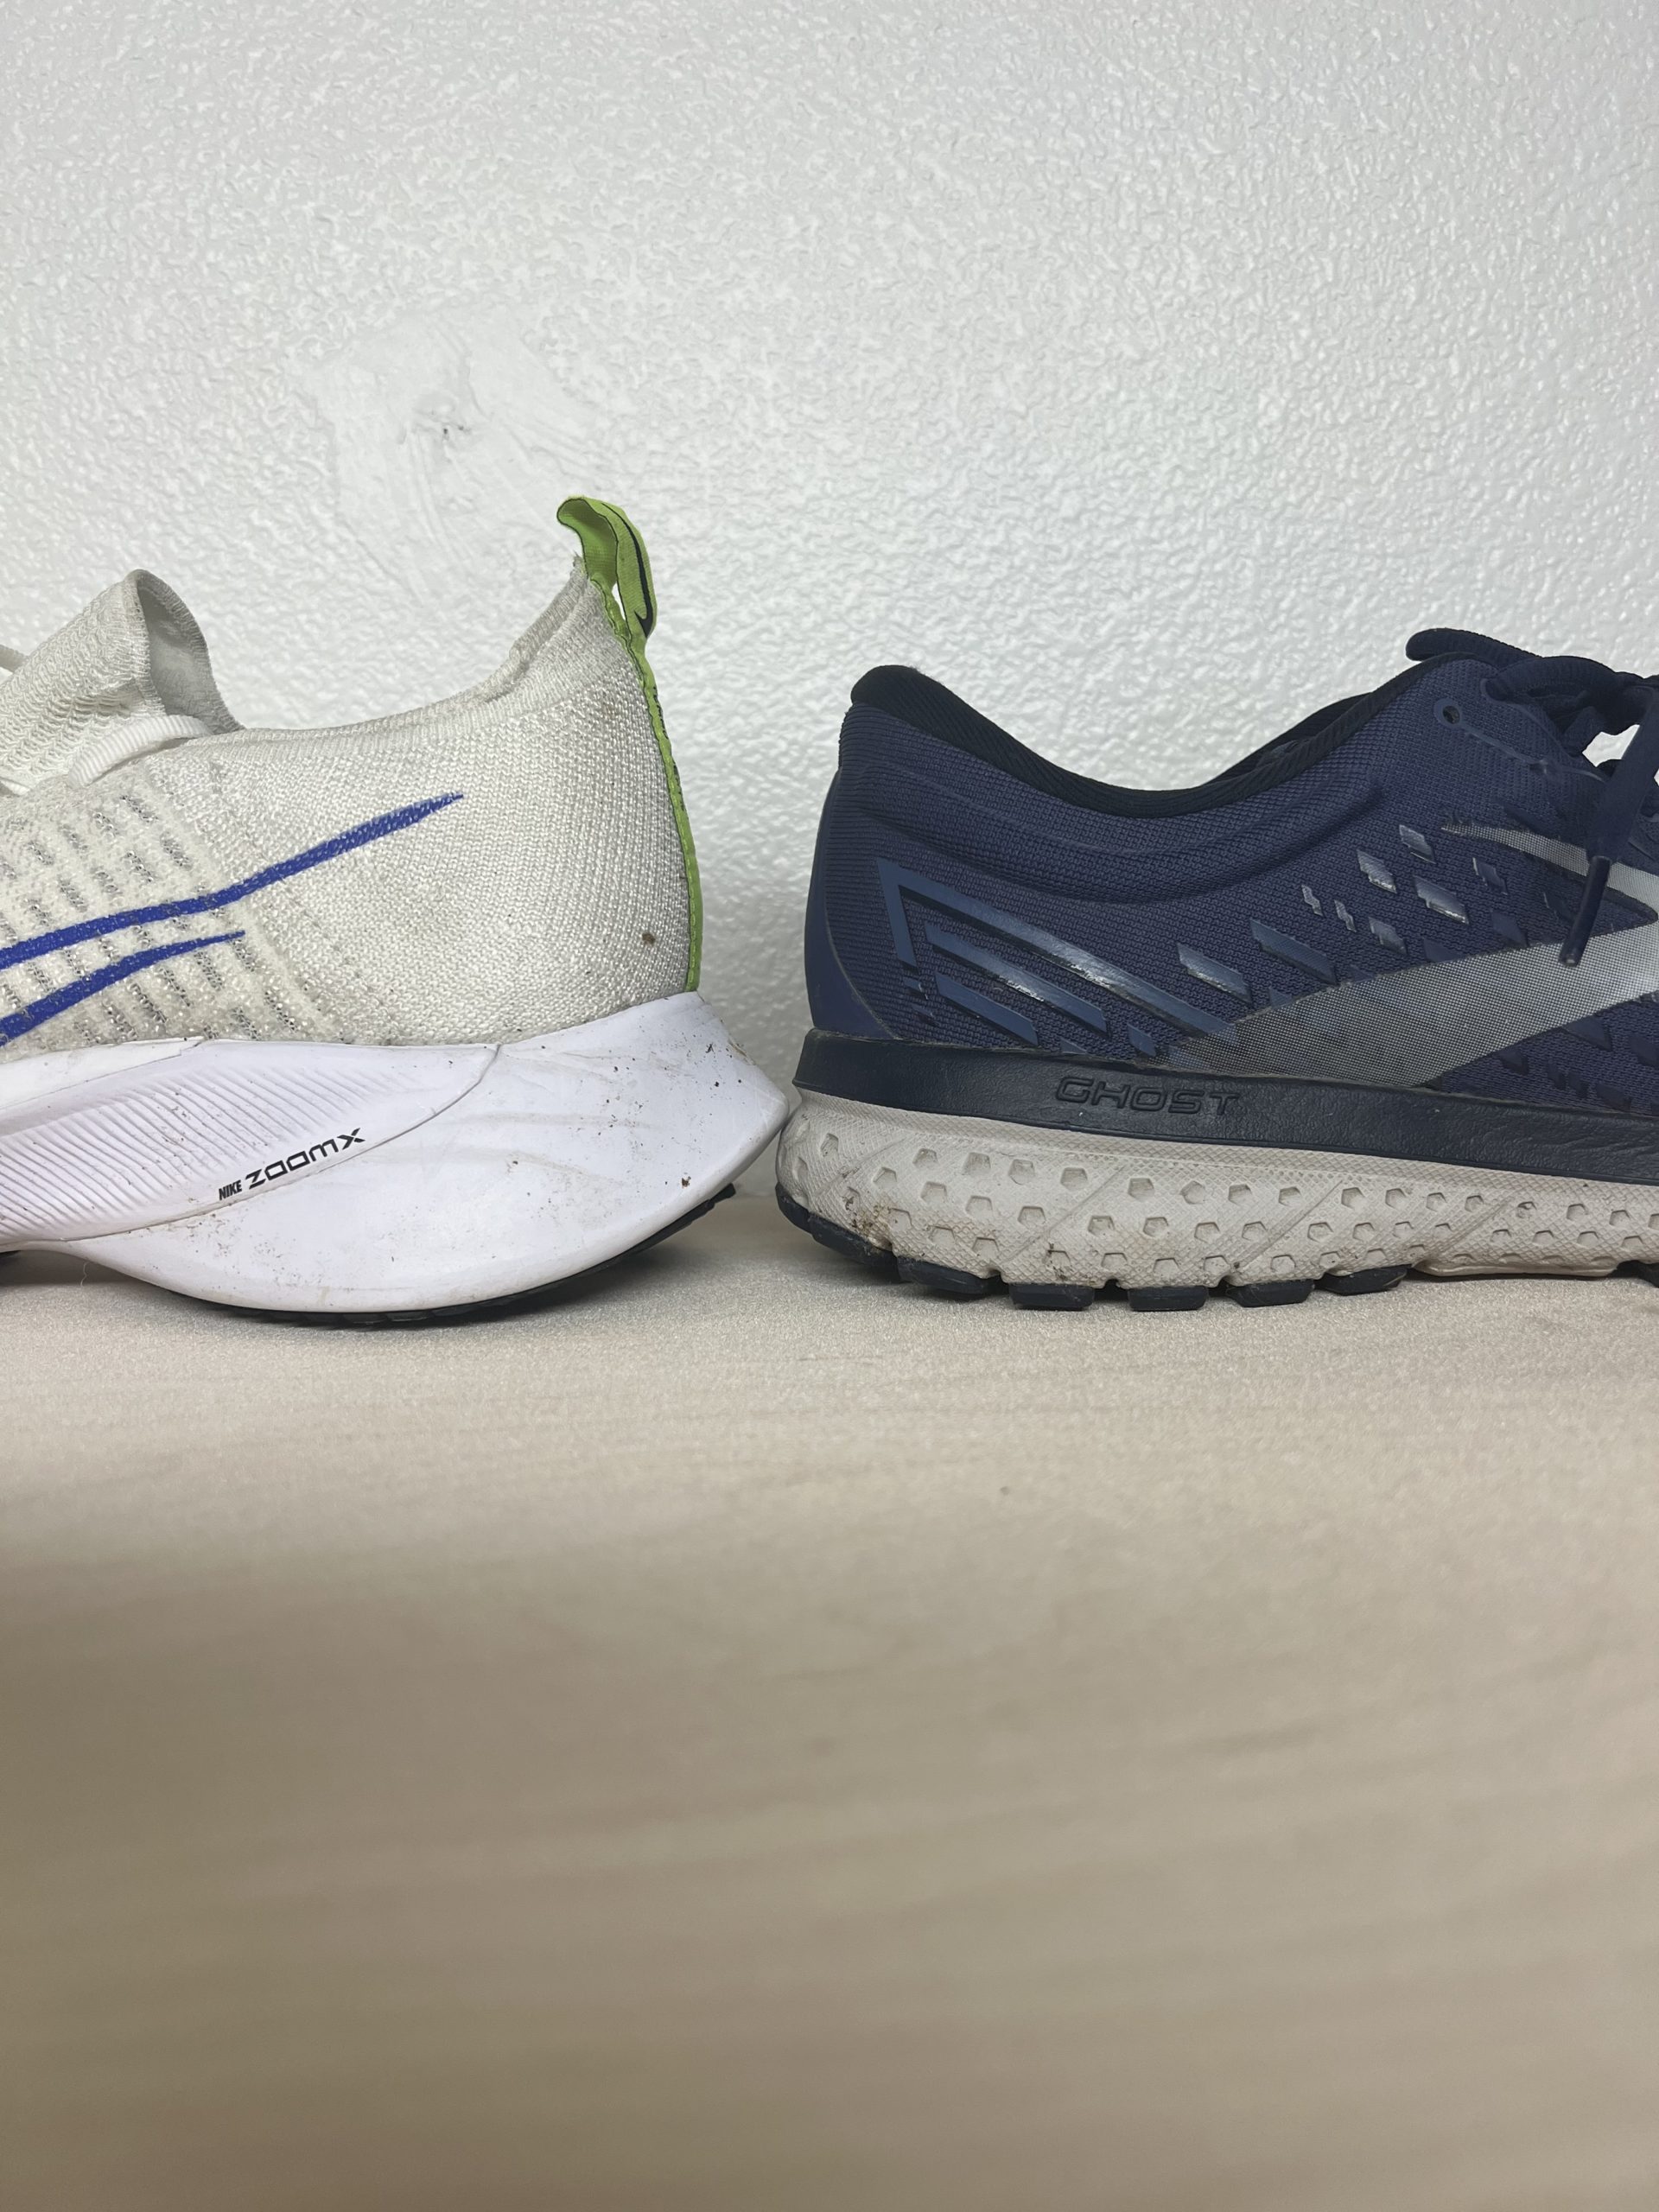 Comparing tempo next% heel height to brooks ghost stack height